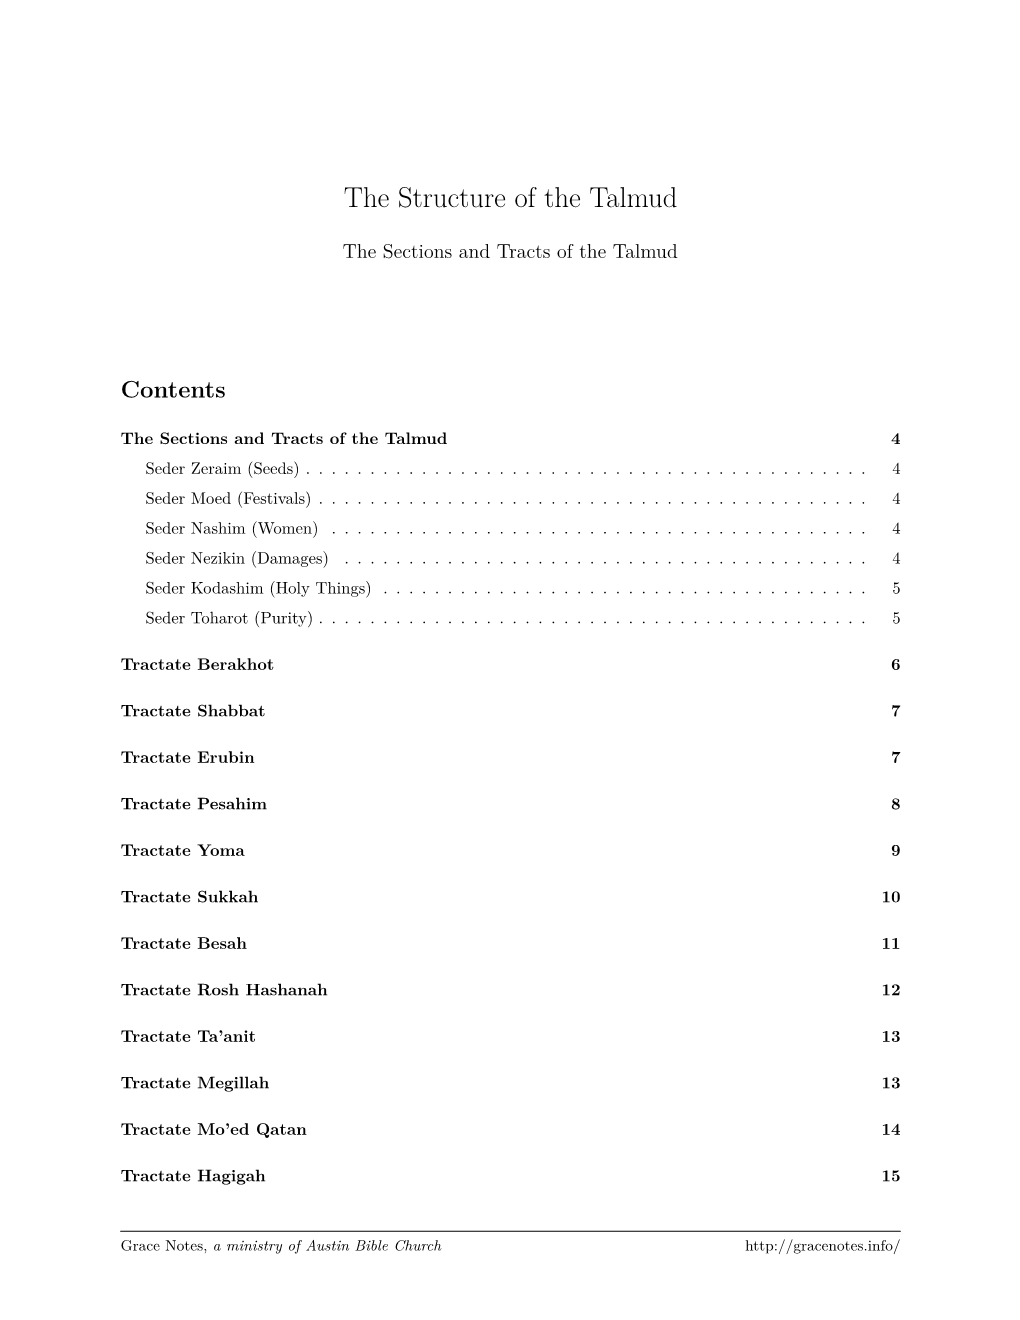 The Structure of the Talmud